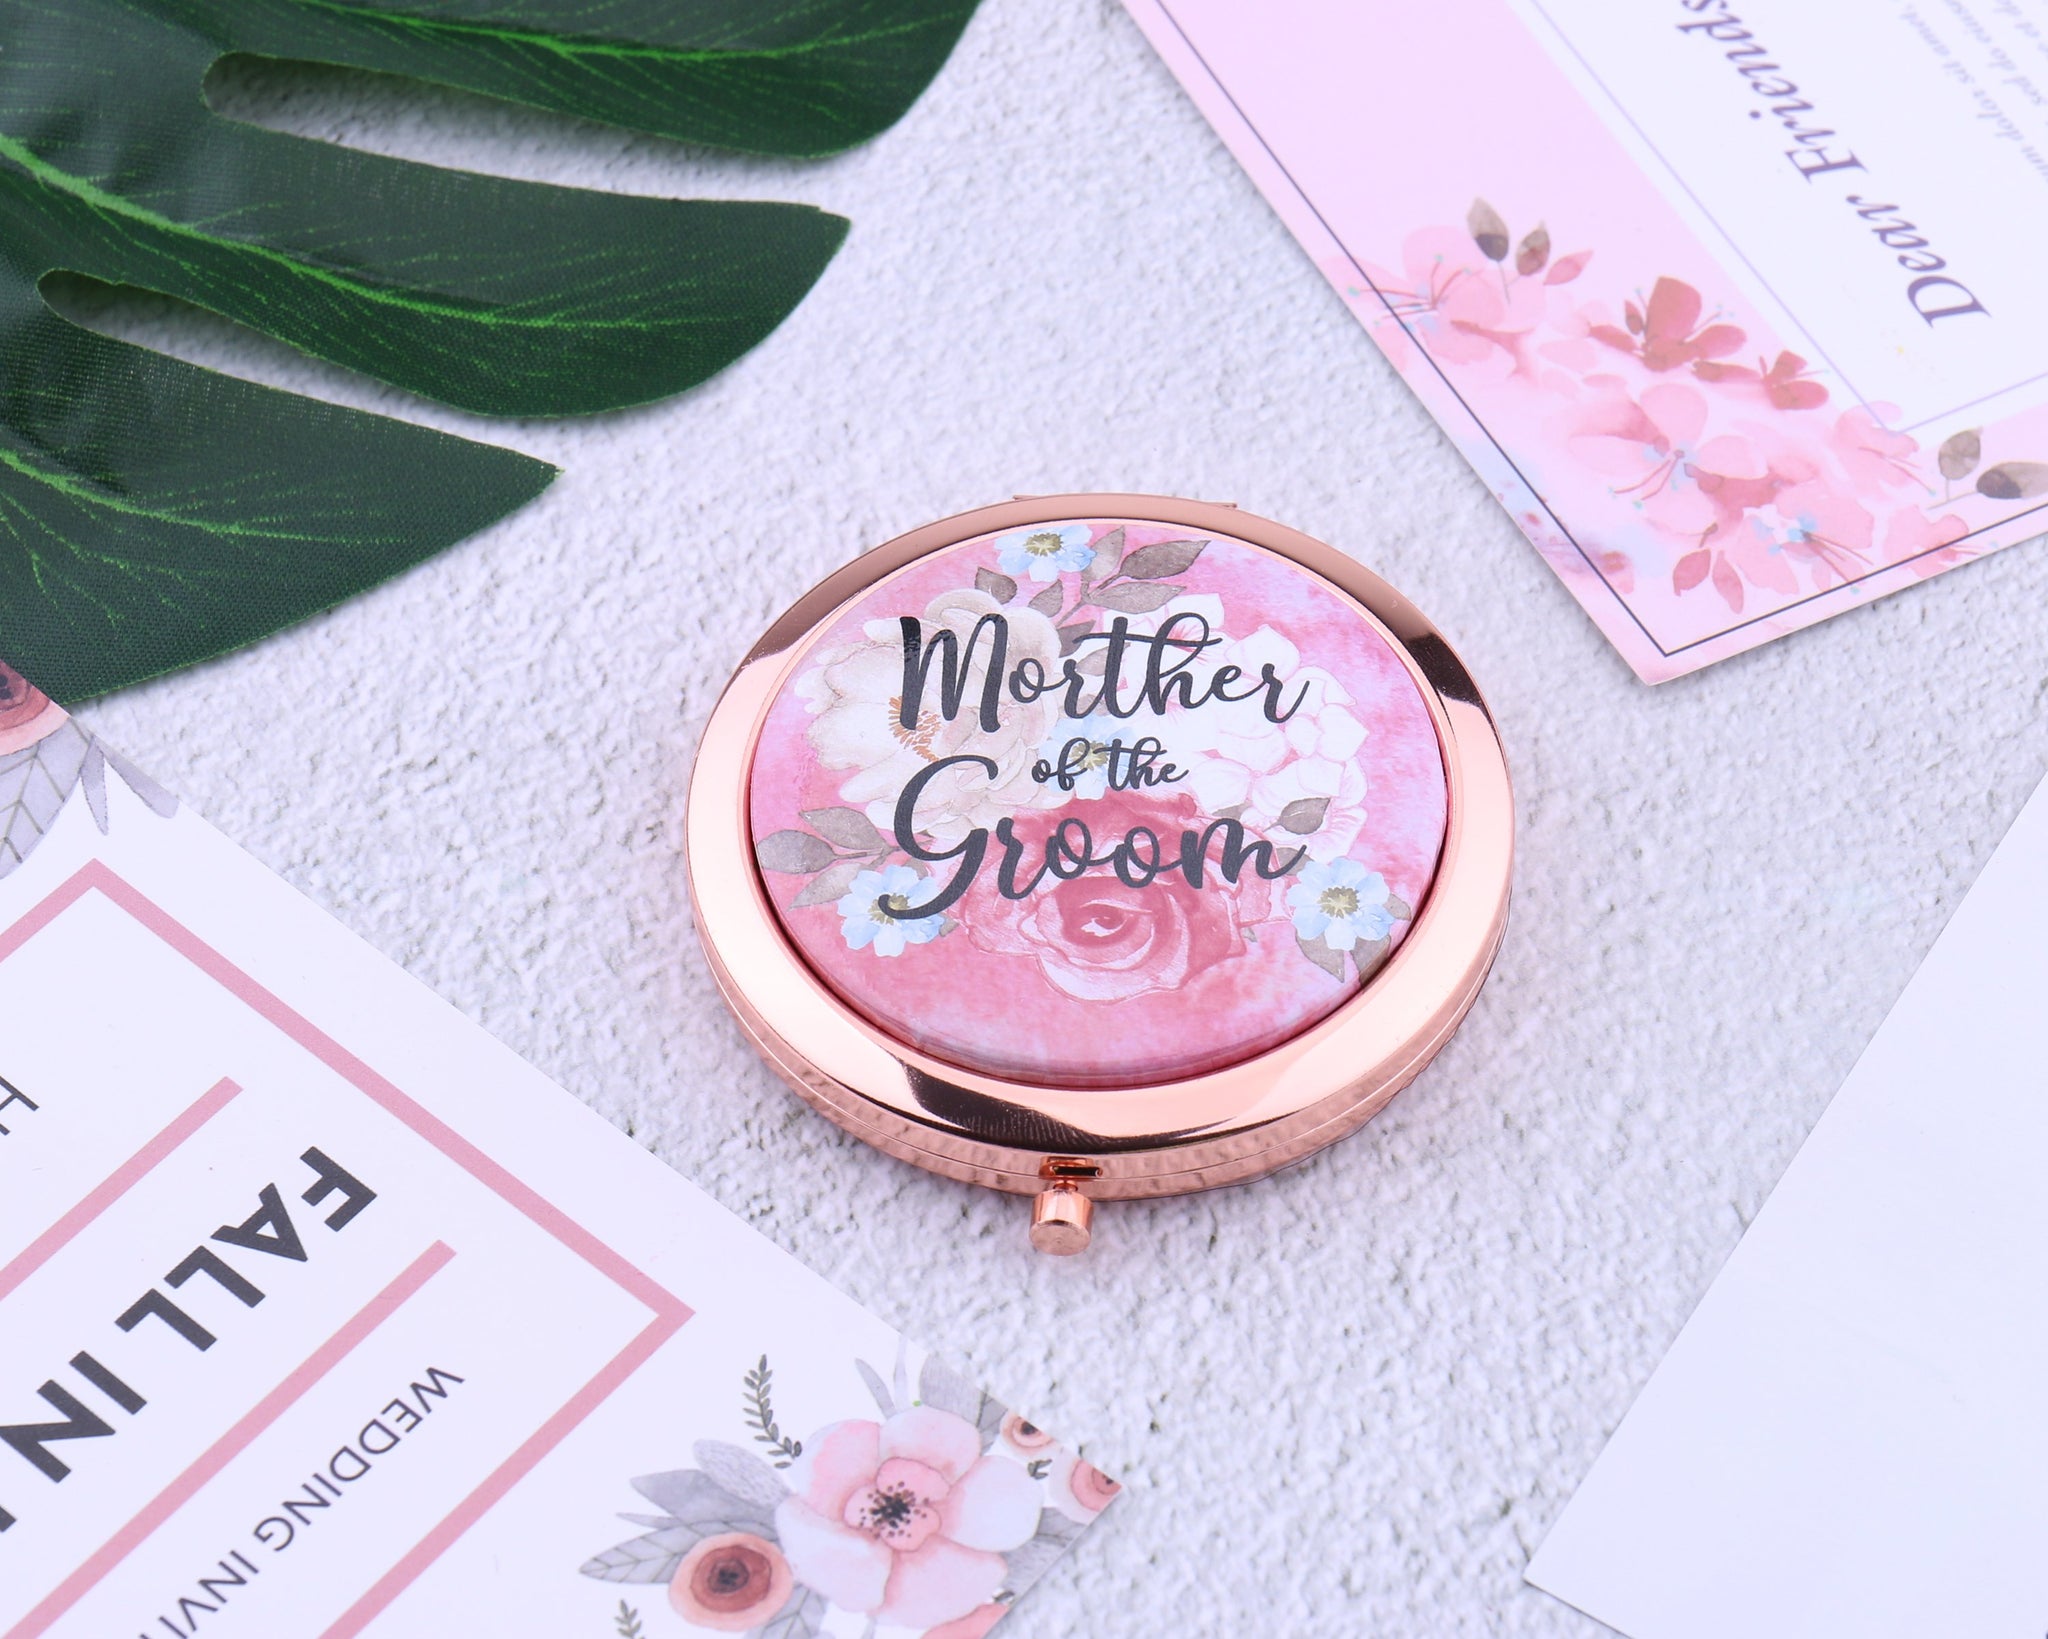 Personalised Rose Gold Compact Mirror Bridesmaid Gift Maid of 